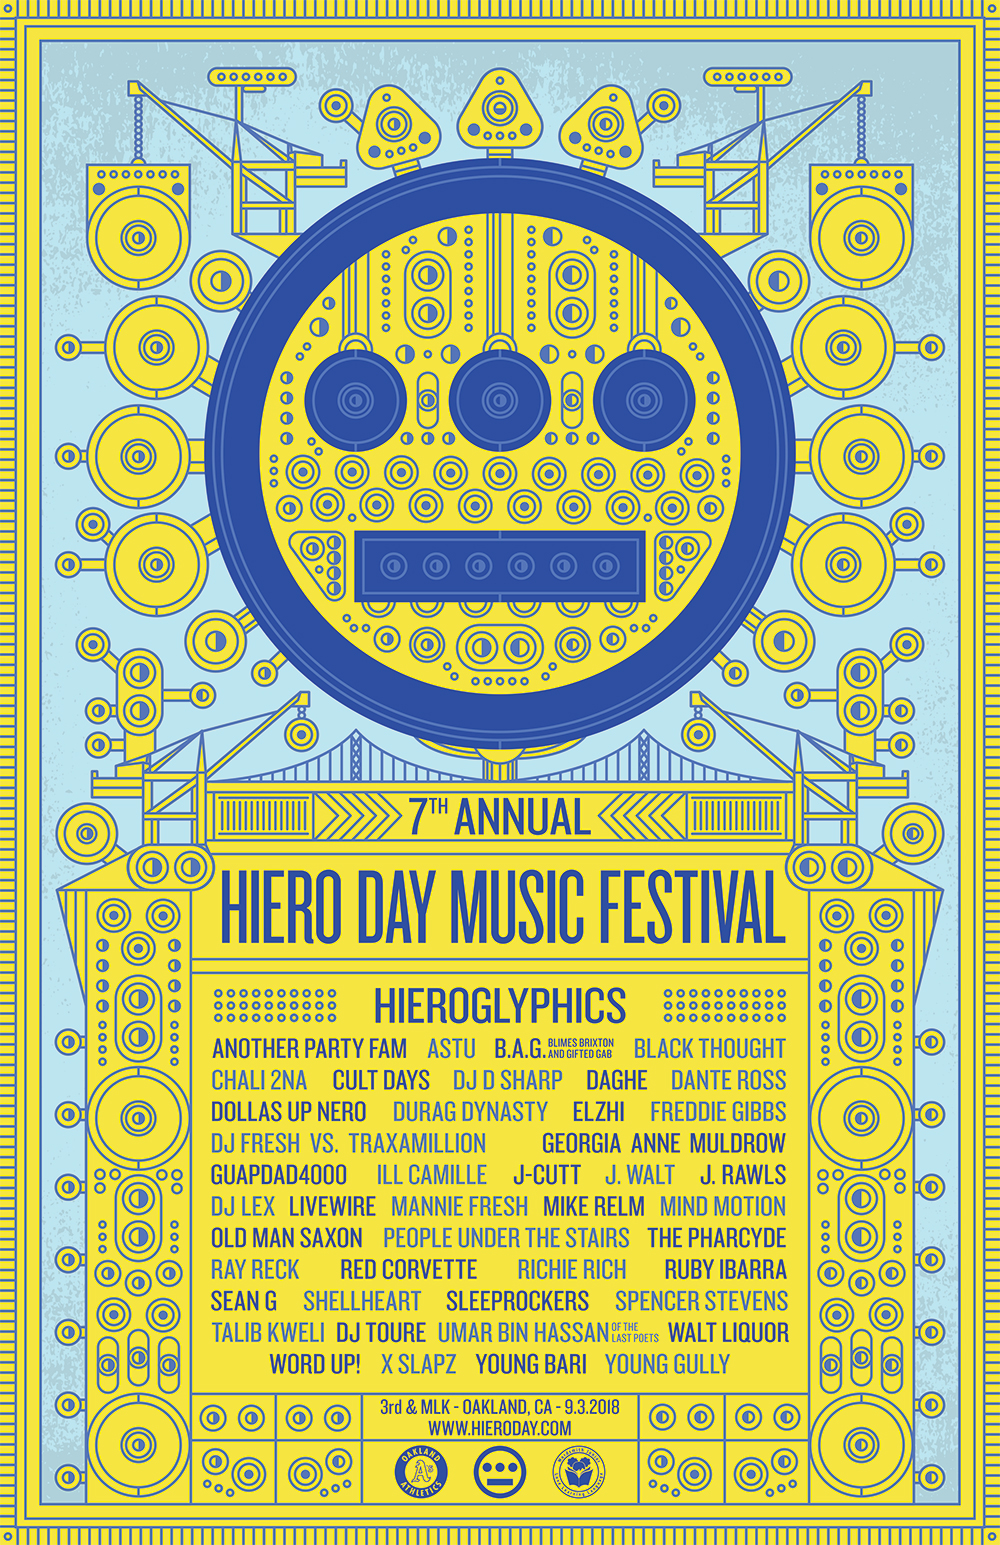 Hieroglyphics Announce Roster For 7th Annual “Hiero Day” The Latest